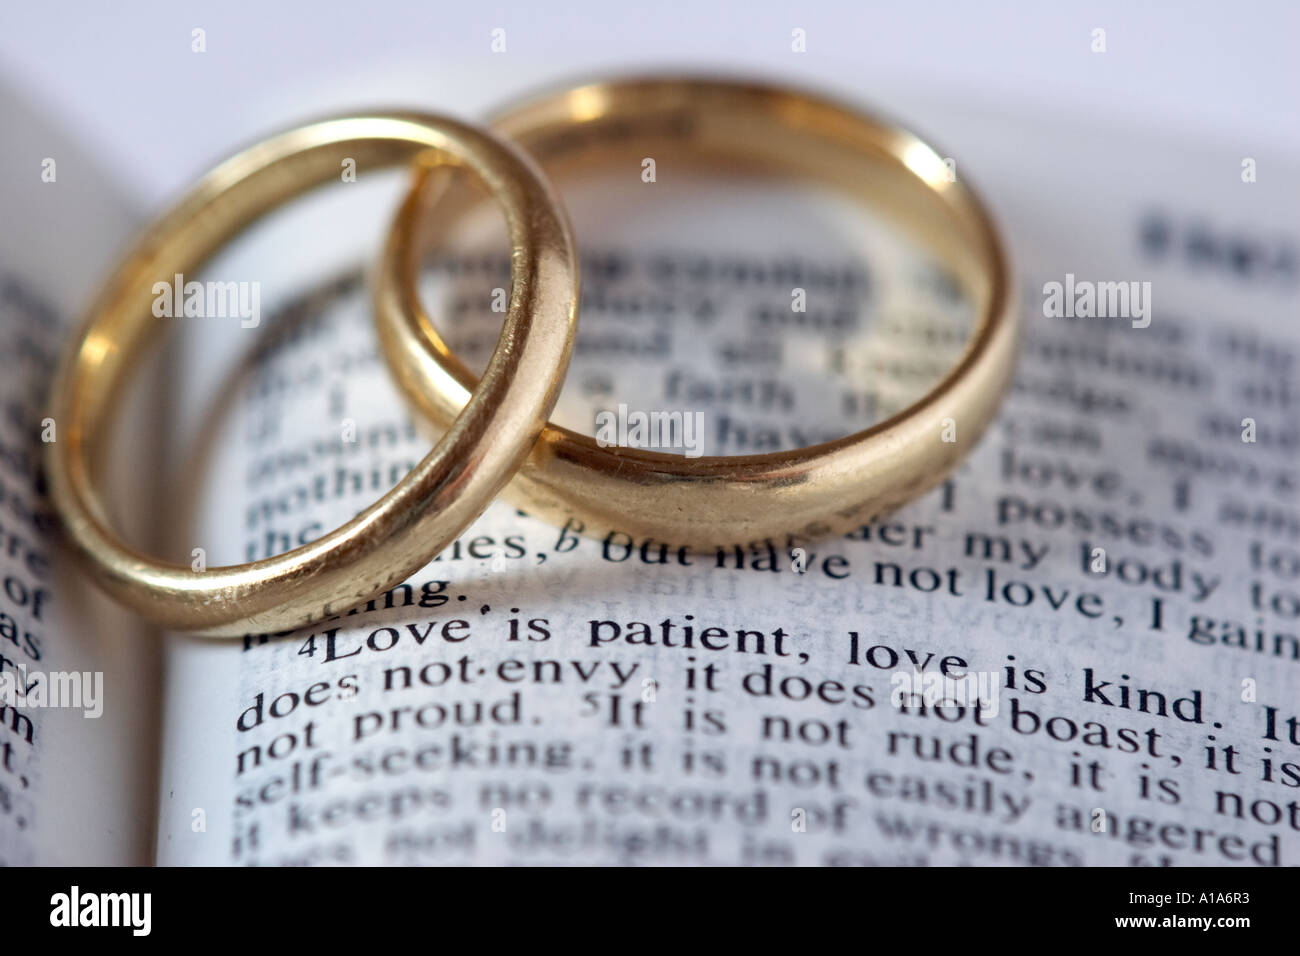 Wedding rings with Bible verse Stock Photo 5825266 Alamy